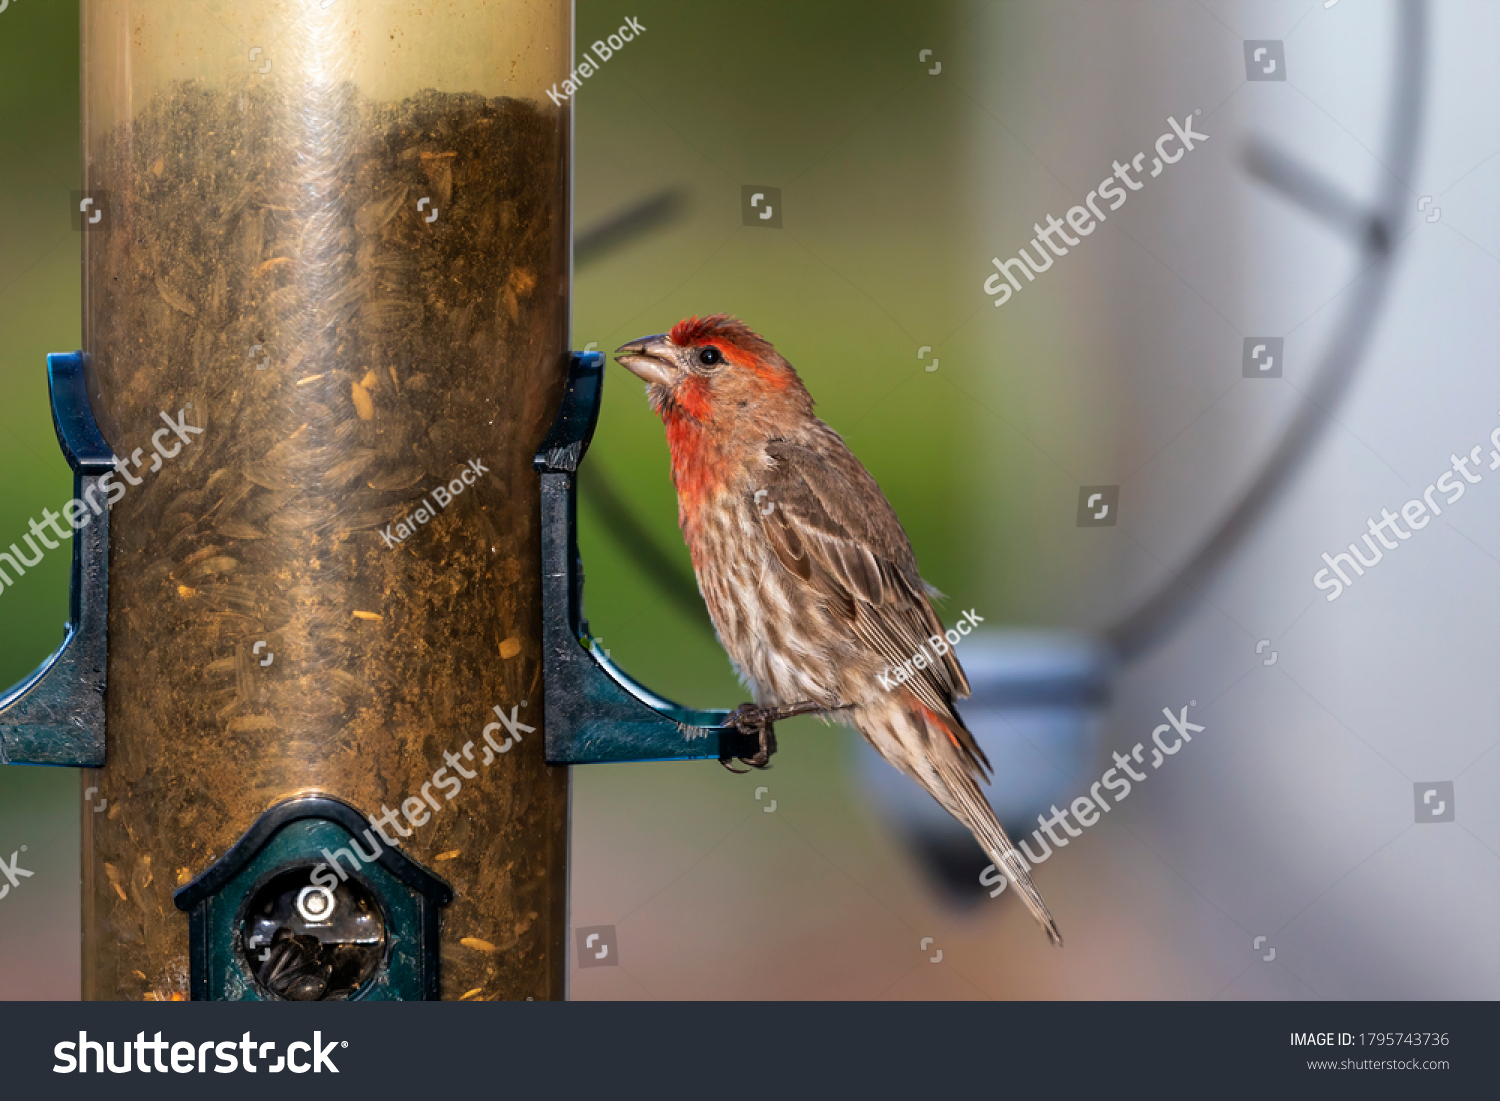 The house finch. Young bird on the feeder. Bird native to western North America. #1795743736